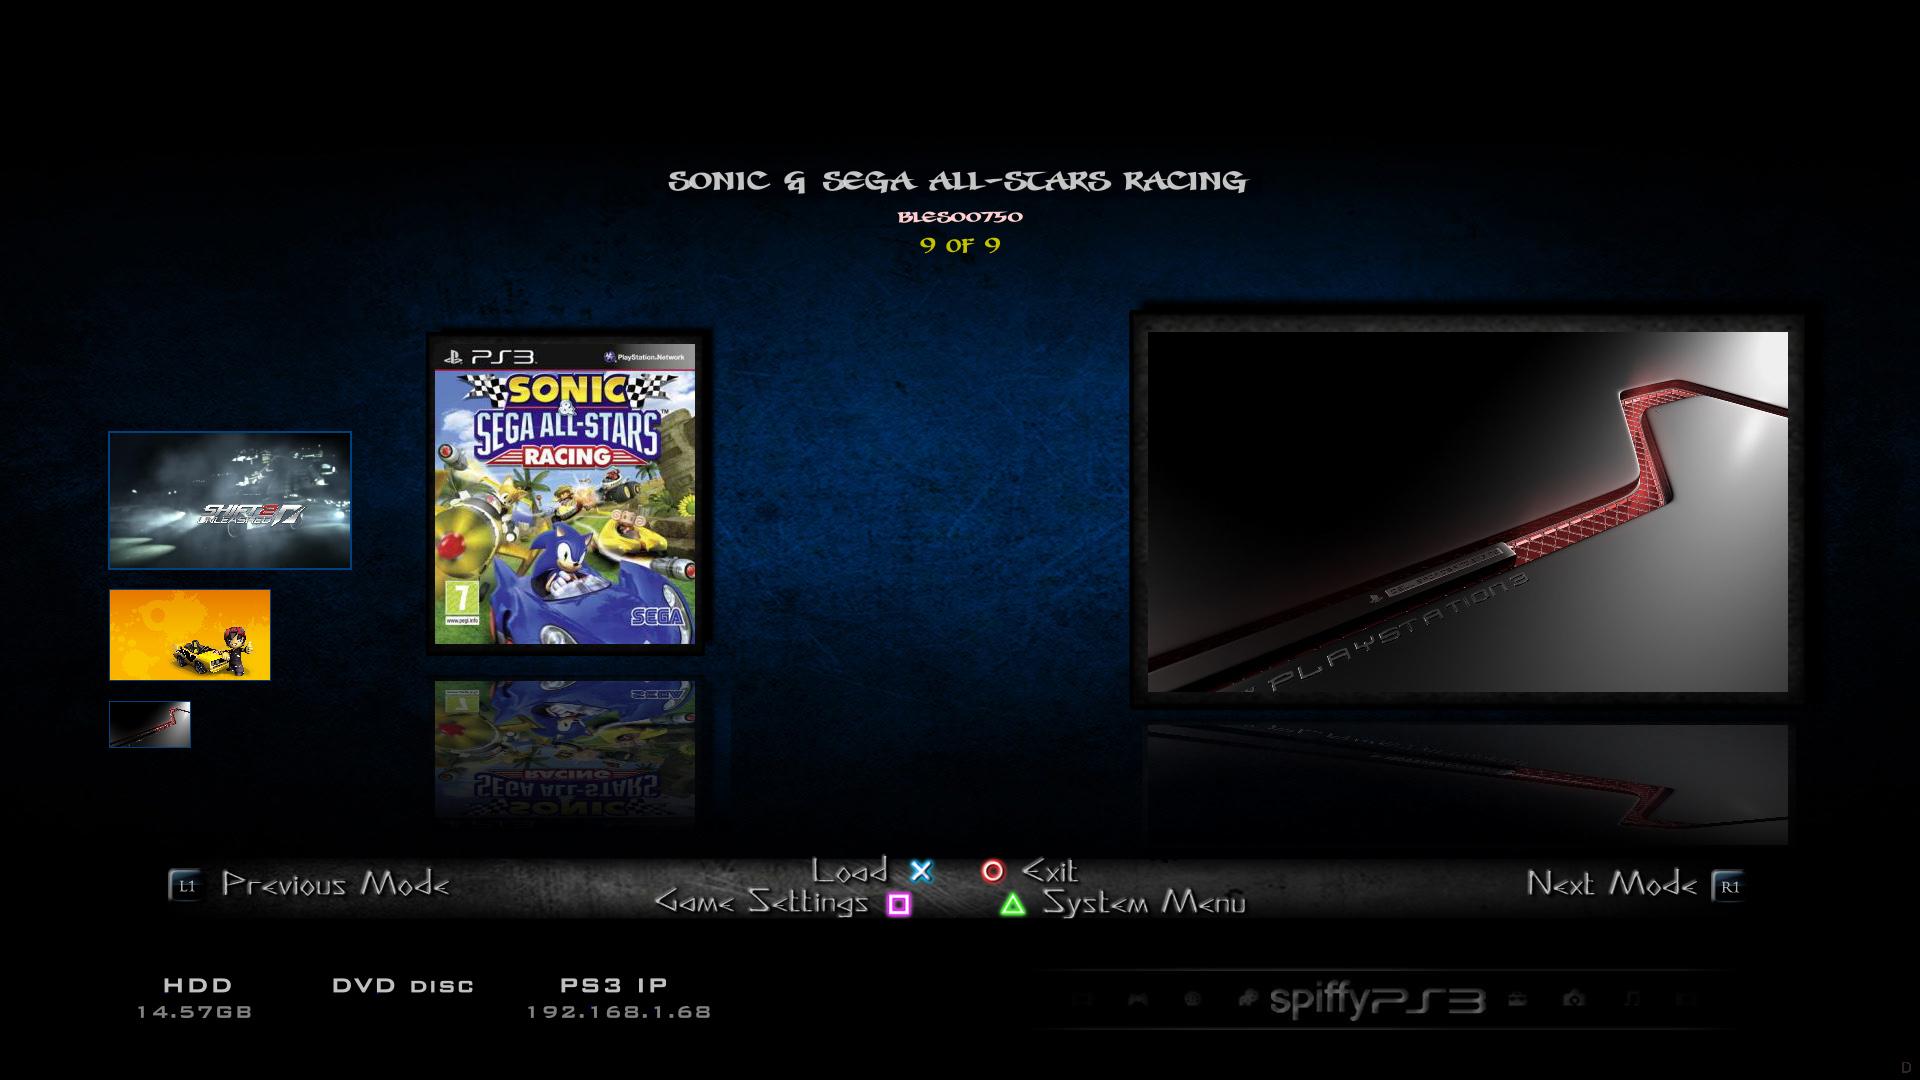 Playstation 3 Theme Depository   Themes for PS3 software and more